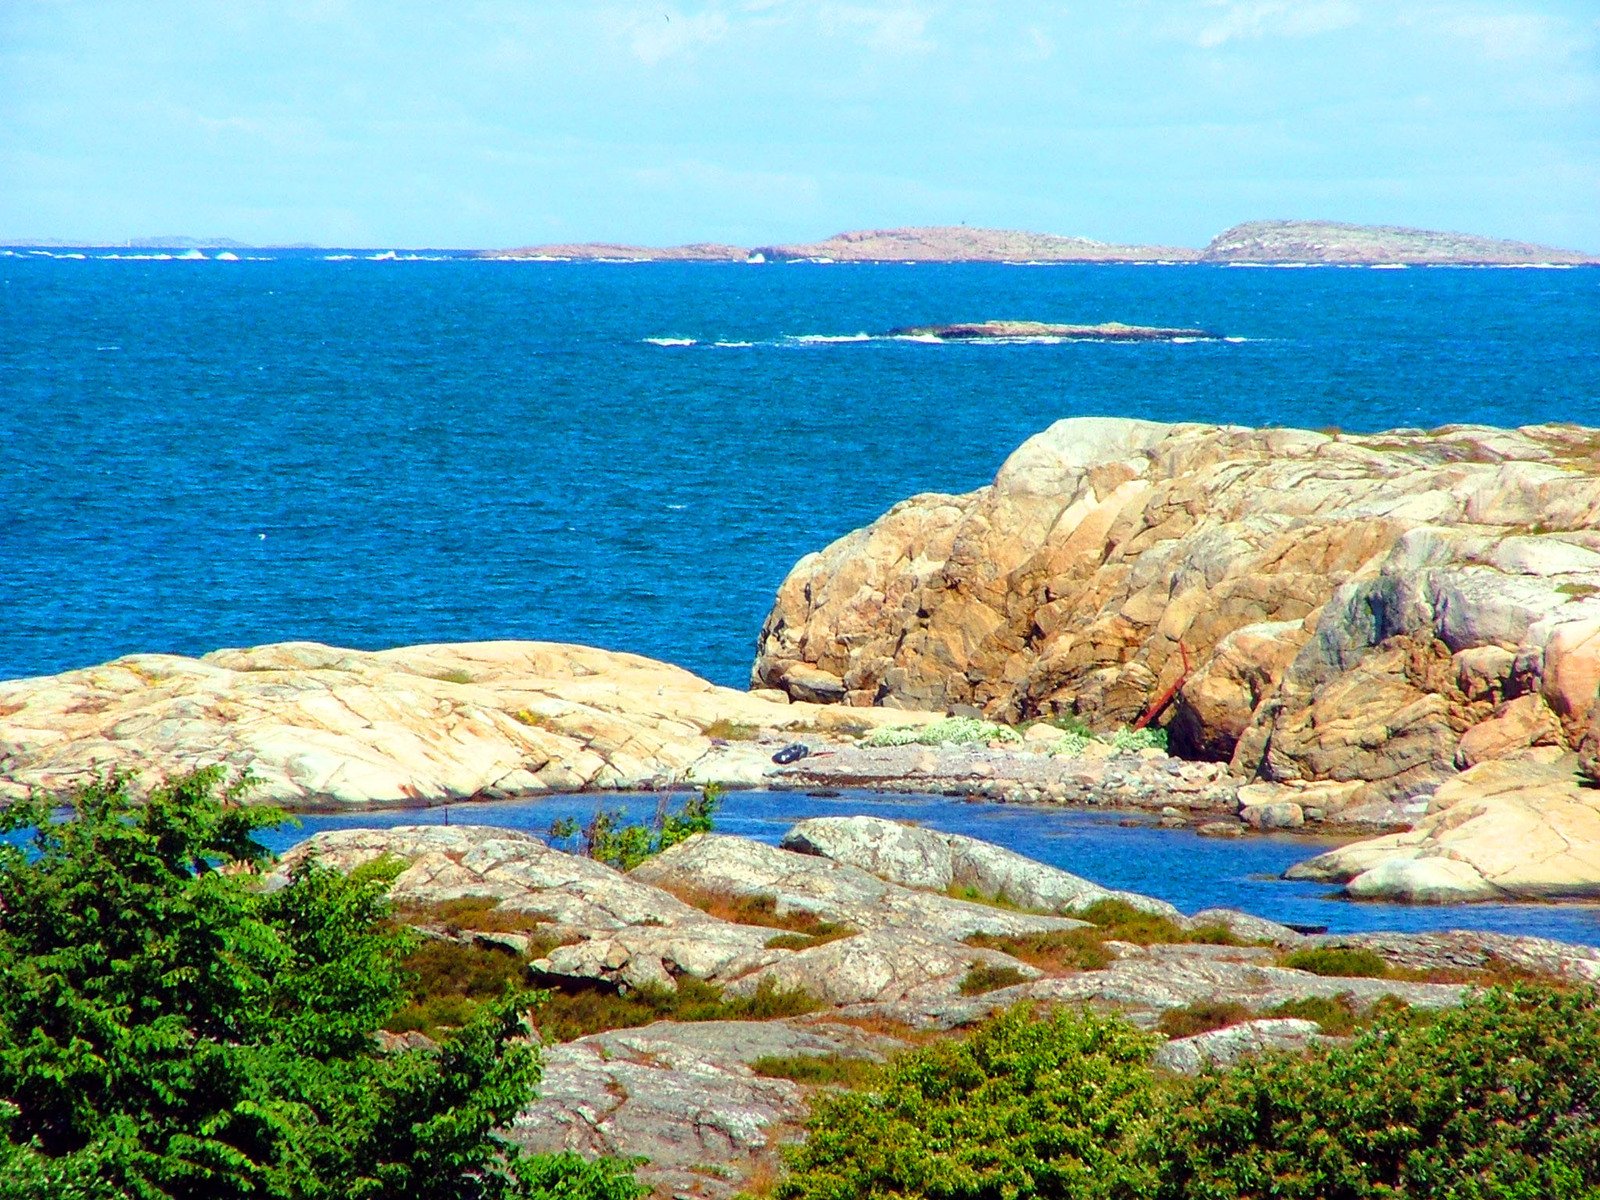 a large body of water surrounded by rocks and a shore